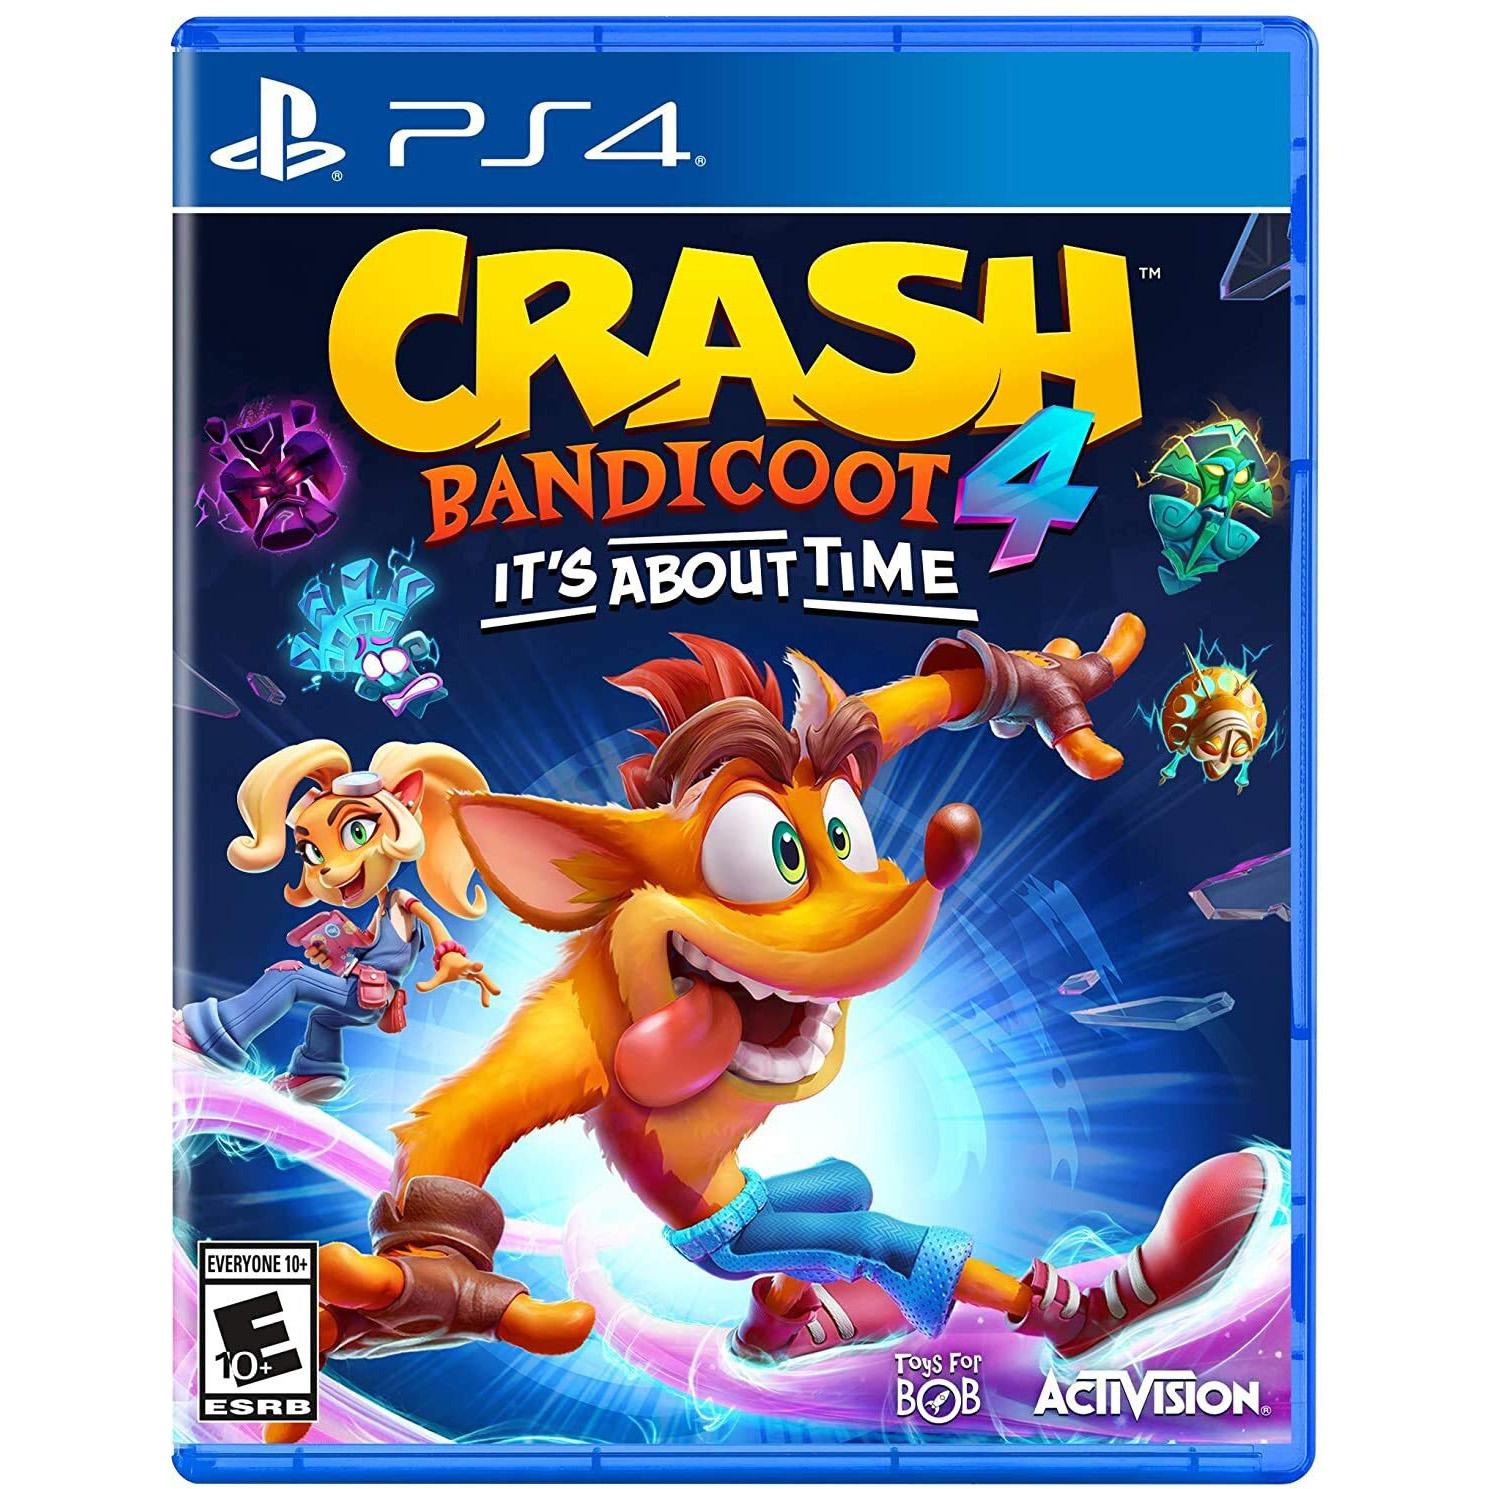 Crash Bandicoot 4 Its About Time PS4 or Xbox One for $39.99 Shipped